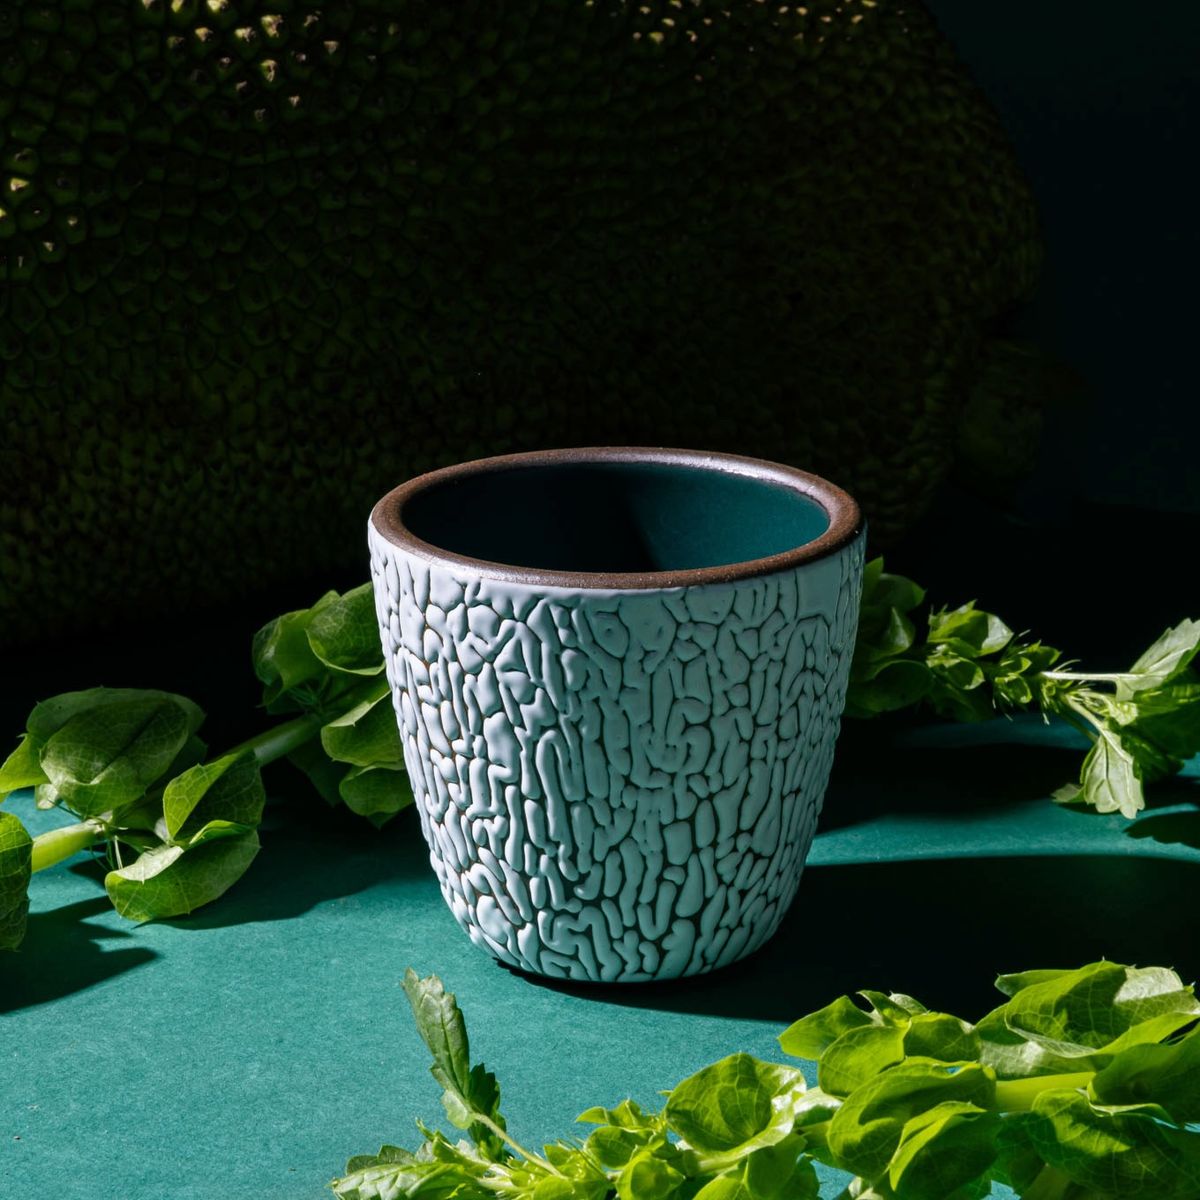 A small ceramic cup with cracked texture and the interior being dark teal, sitting in a moody studio setting with foliage